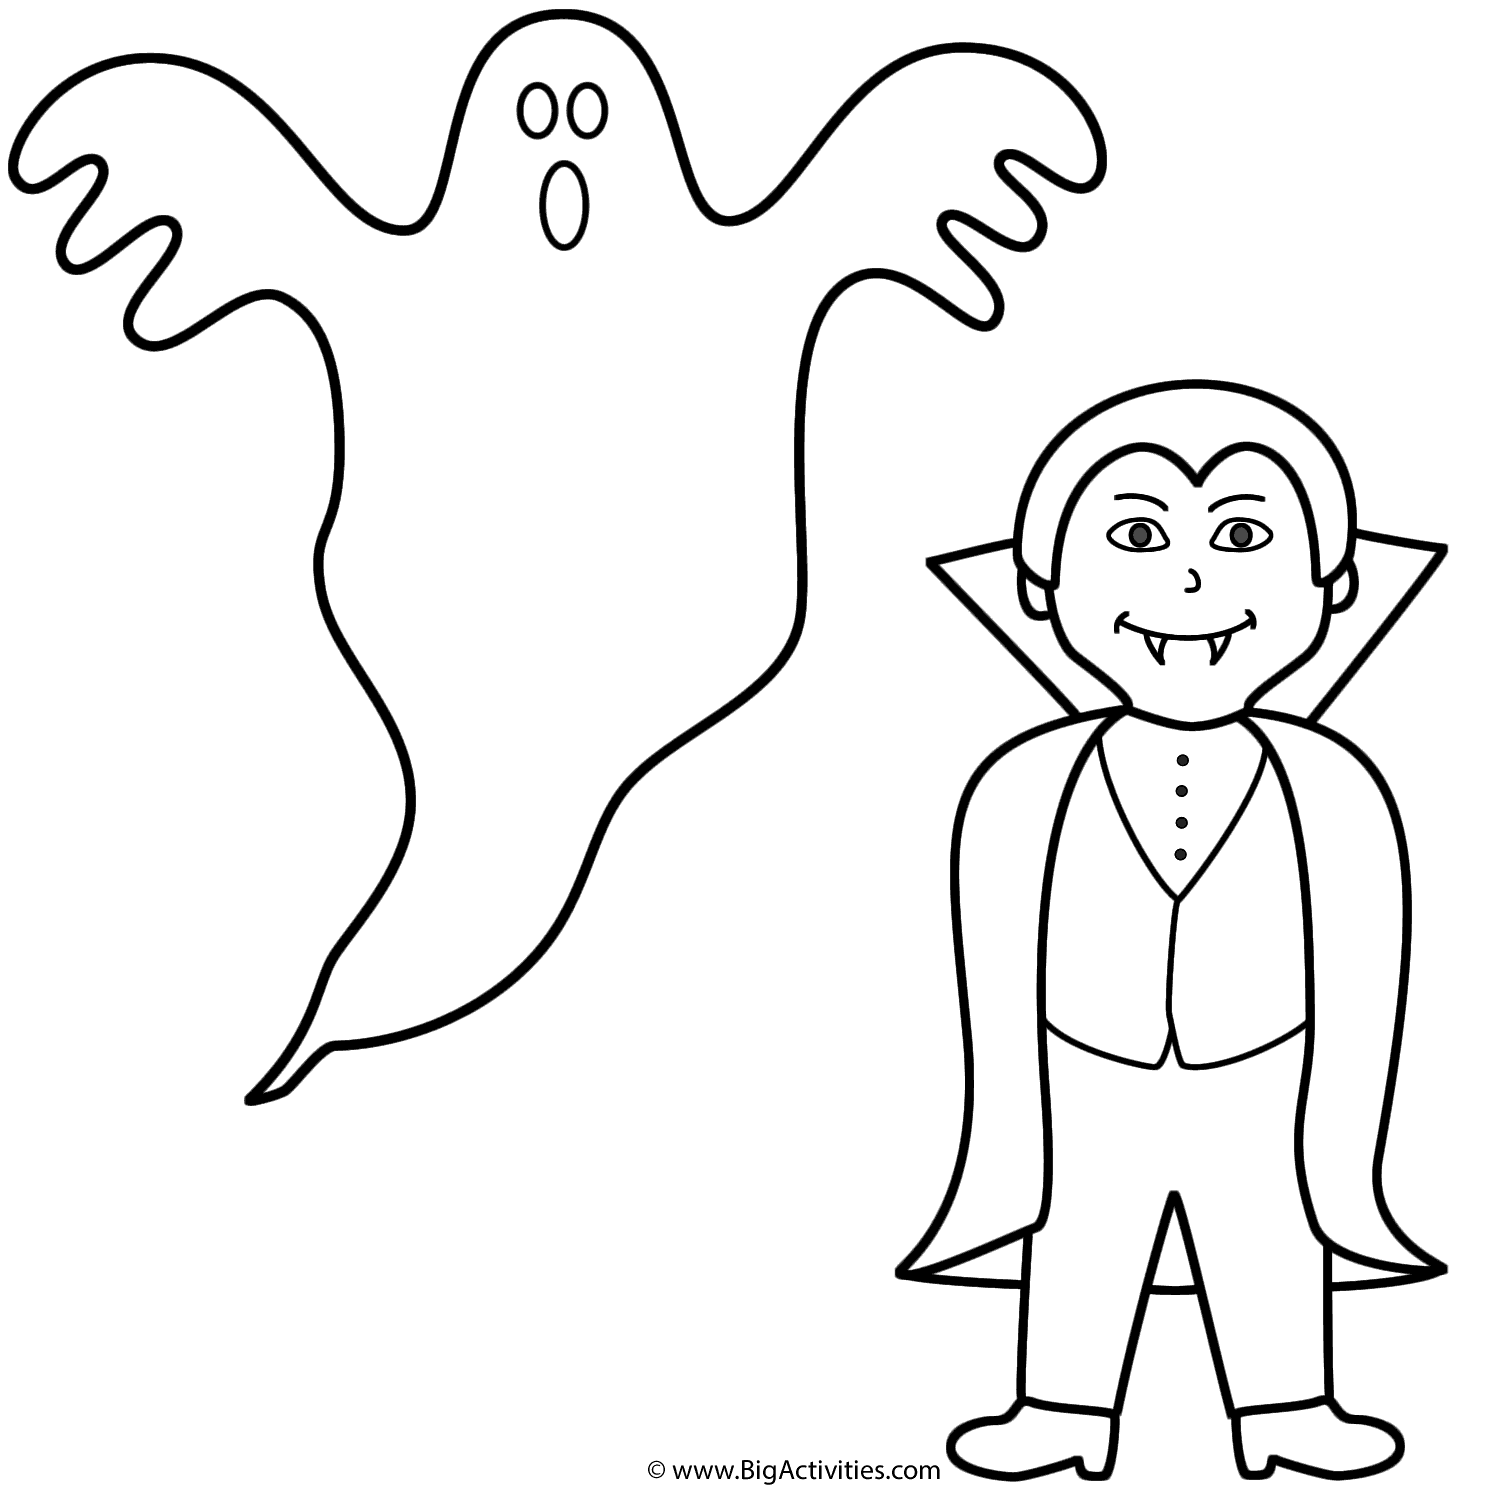 Ghost with a vampire - Coloring Page (Halloween)